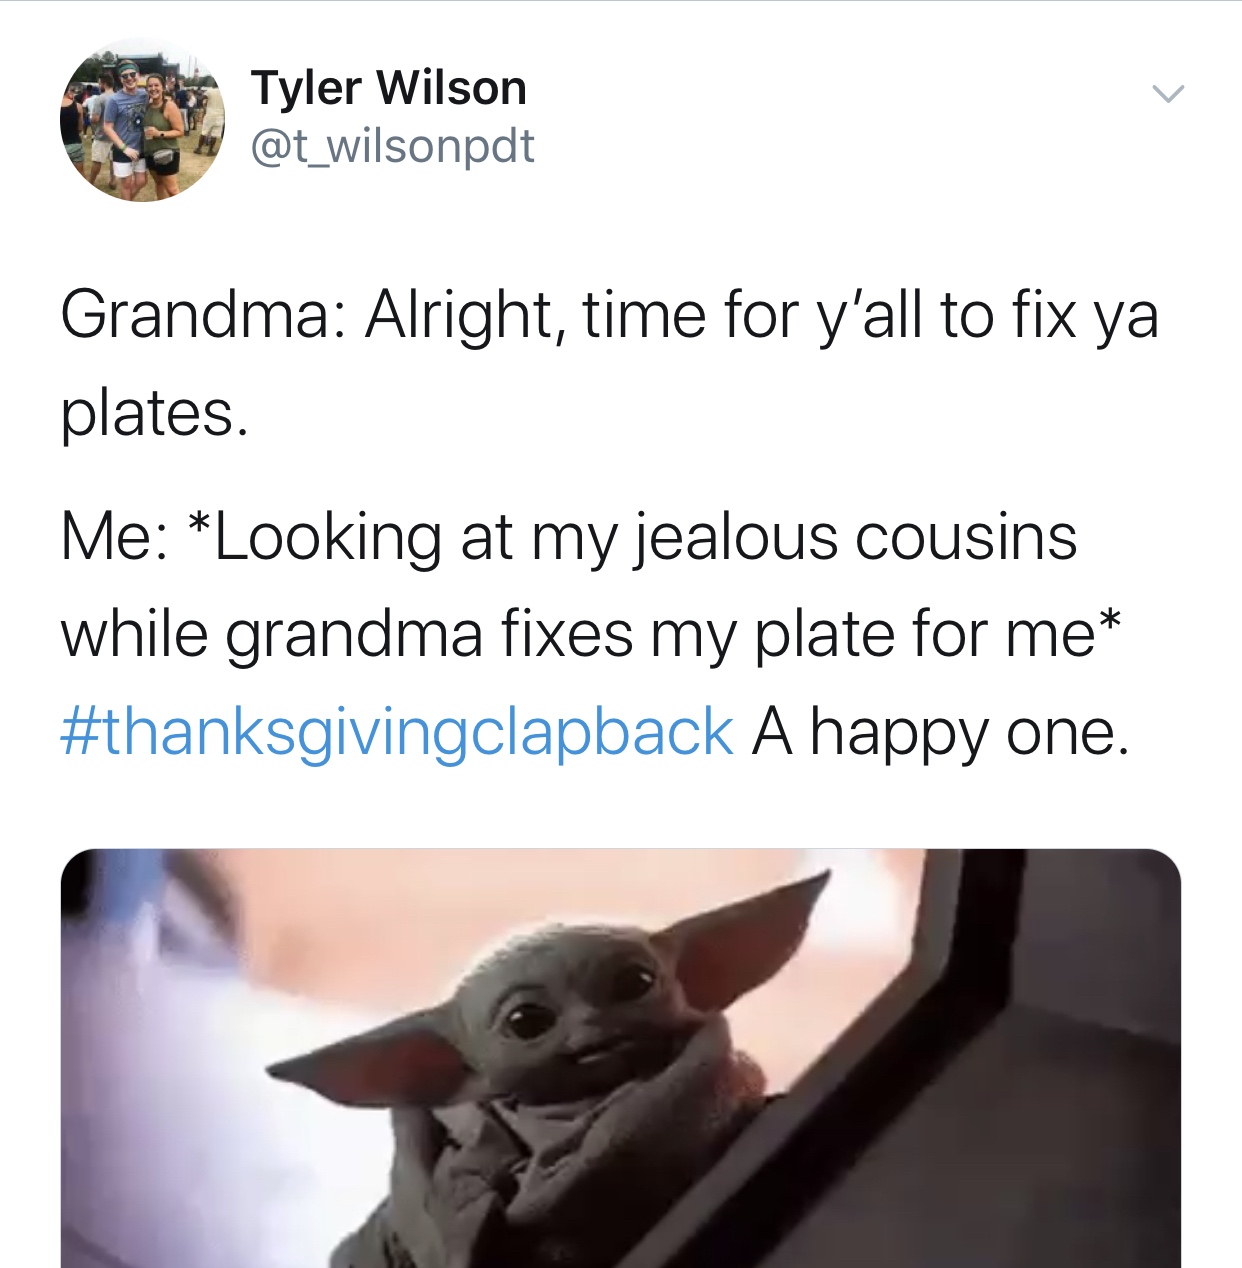 baby yoda gif - Tyler Wilson Grandma Alright, time for y'all to fix ya plates. Me Looking at my jealous cousins while grandma fixes my plate for me A happy one.